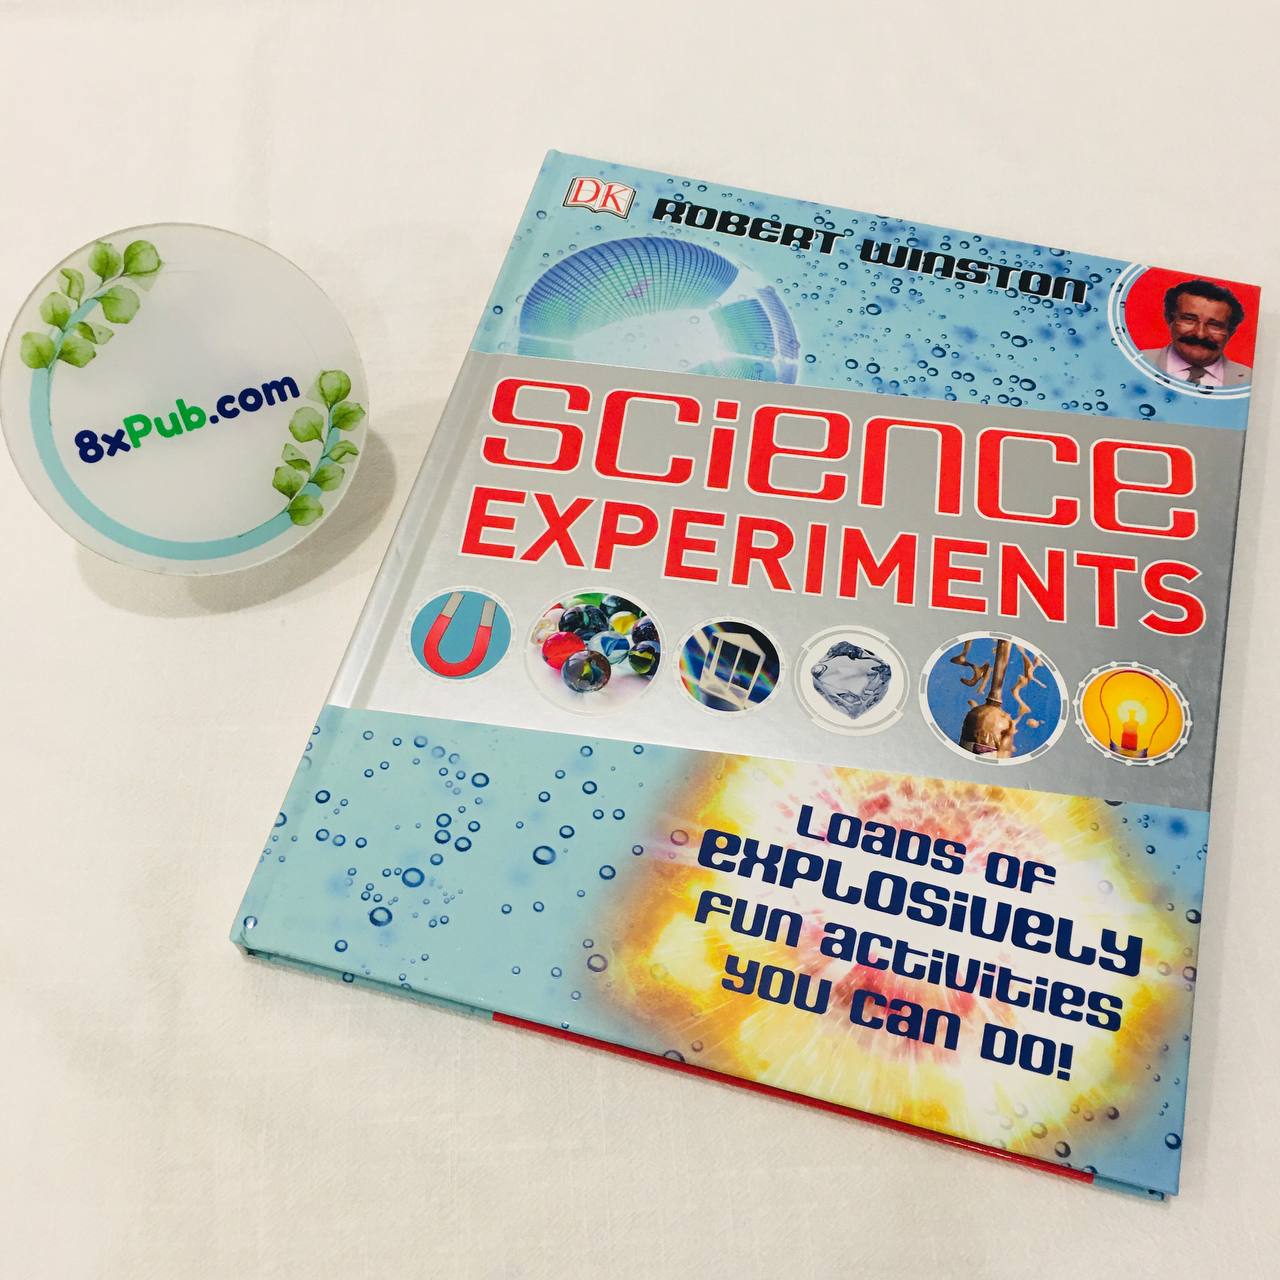 Experiments　DK　books　to　Loads　Science　of　Activities　Explosively　Fun　do